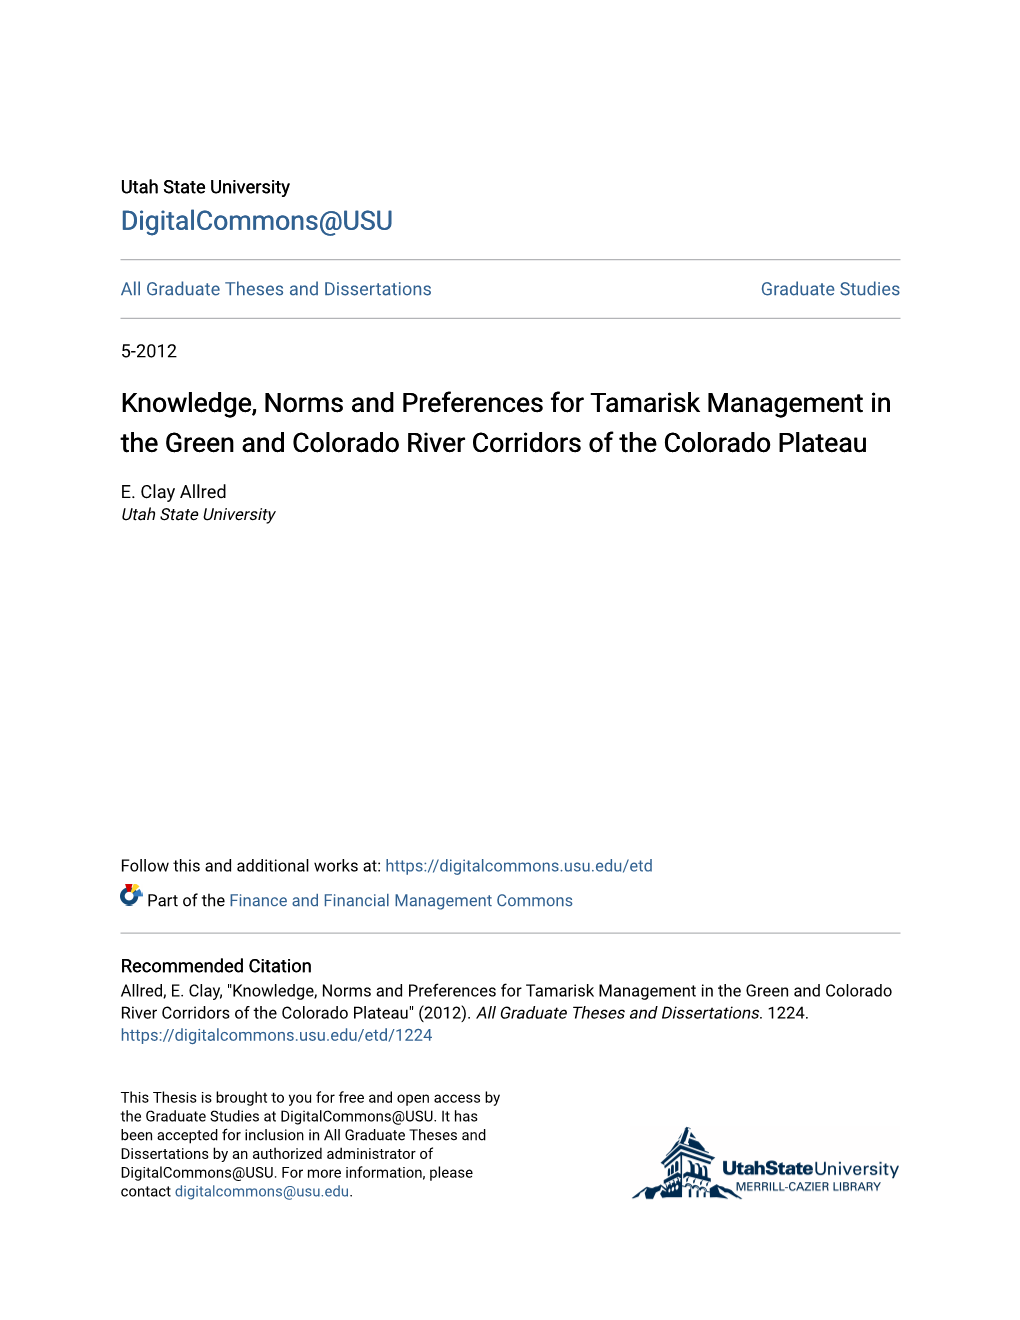 Knowledge, Norms and Preferences for Tamarisk Management in the Green and Colorado River Corridors of the Colorado Plateau